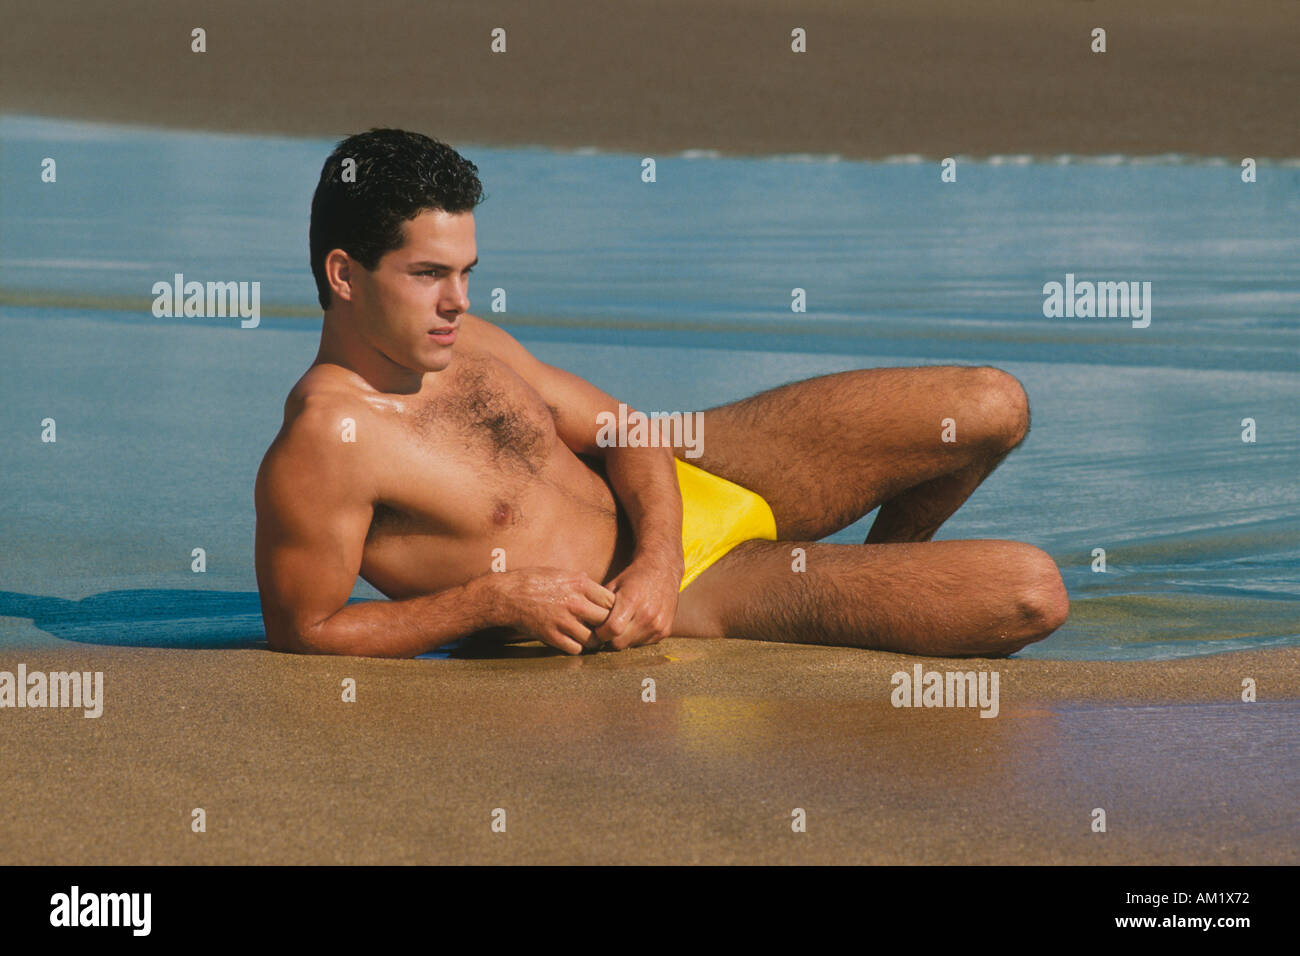 Speedo Boy High Resolution Stock Photography and Images - Alamy